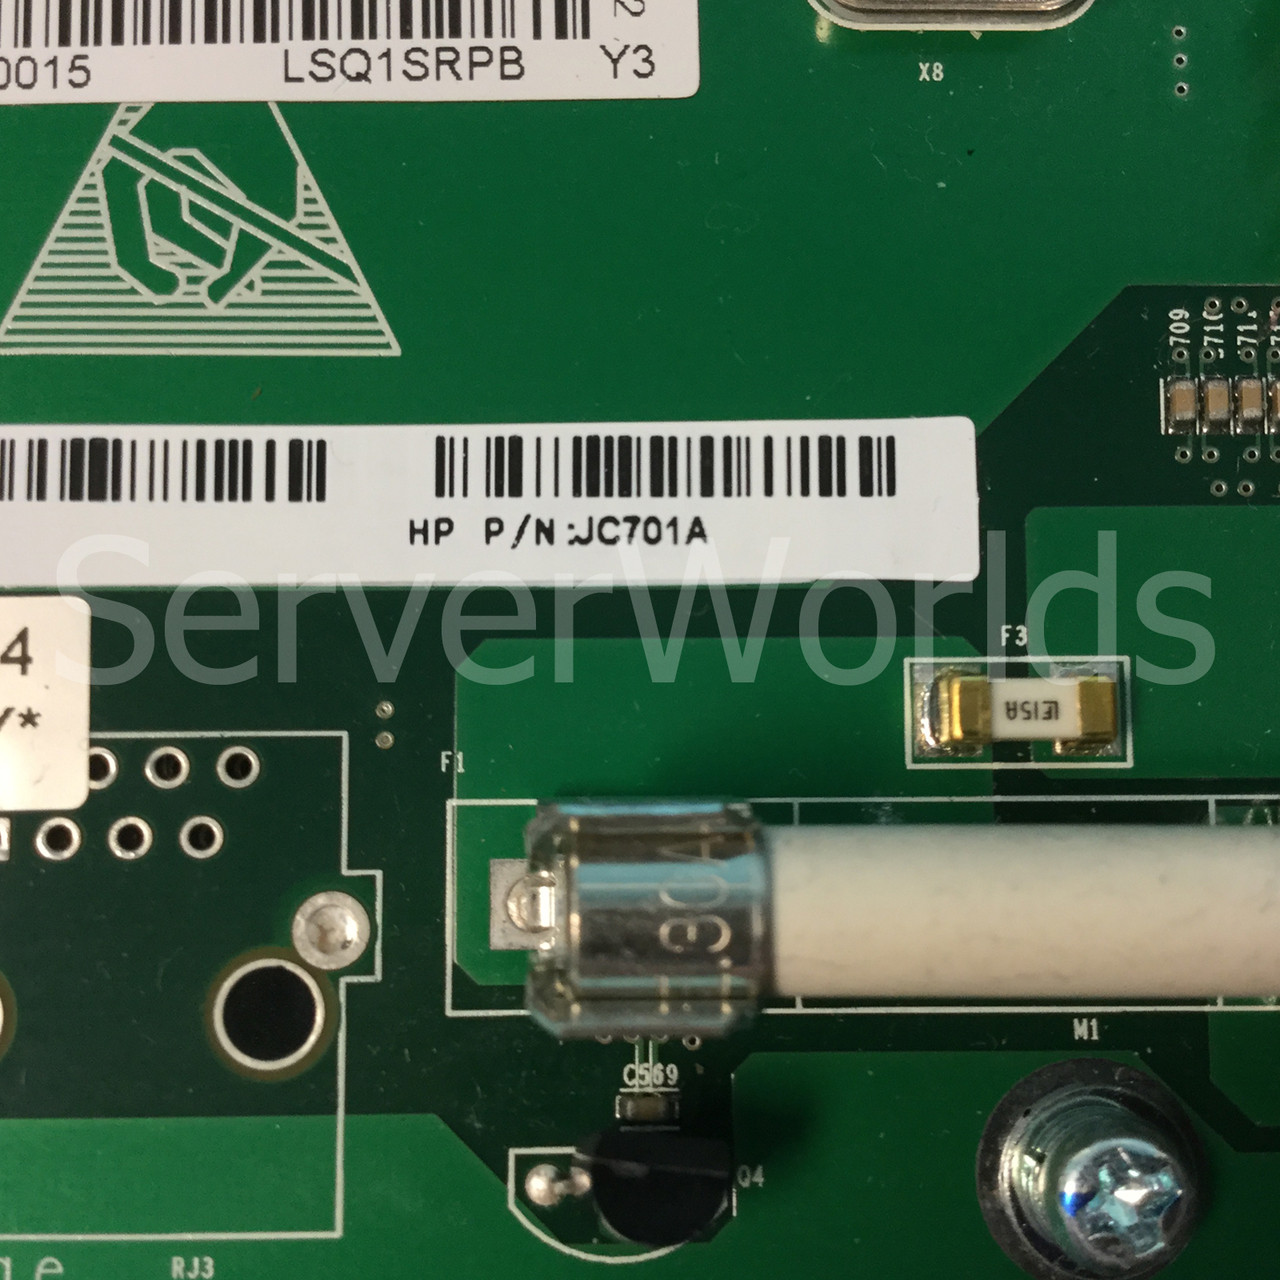 New HP JC701A A7510 Main Processing Unit Module Product Number